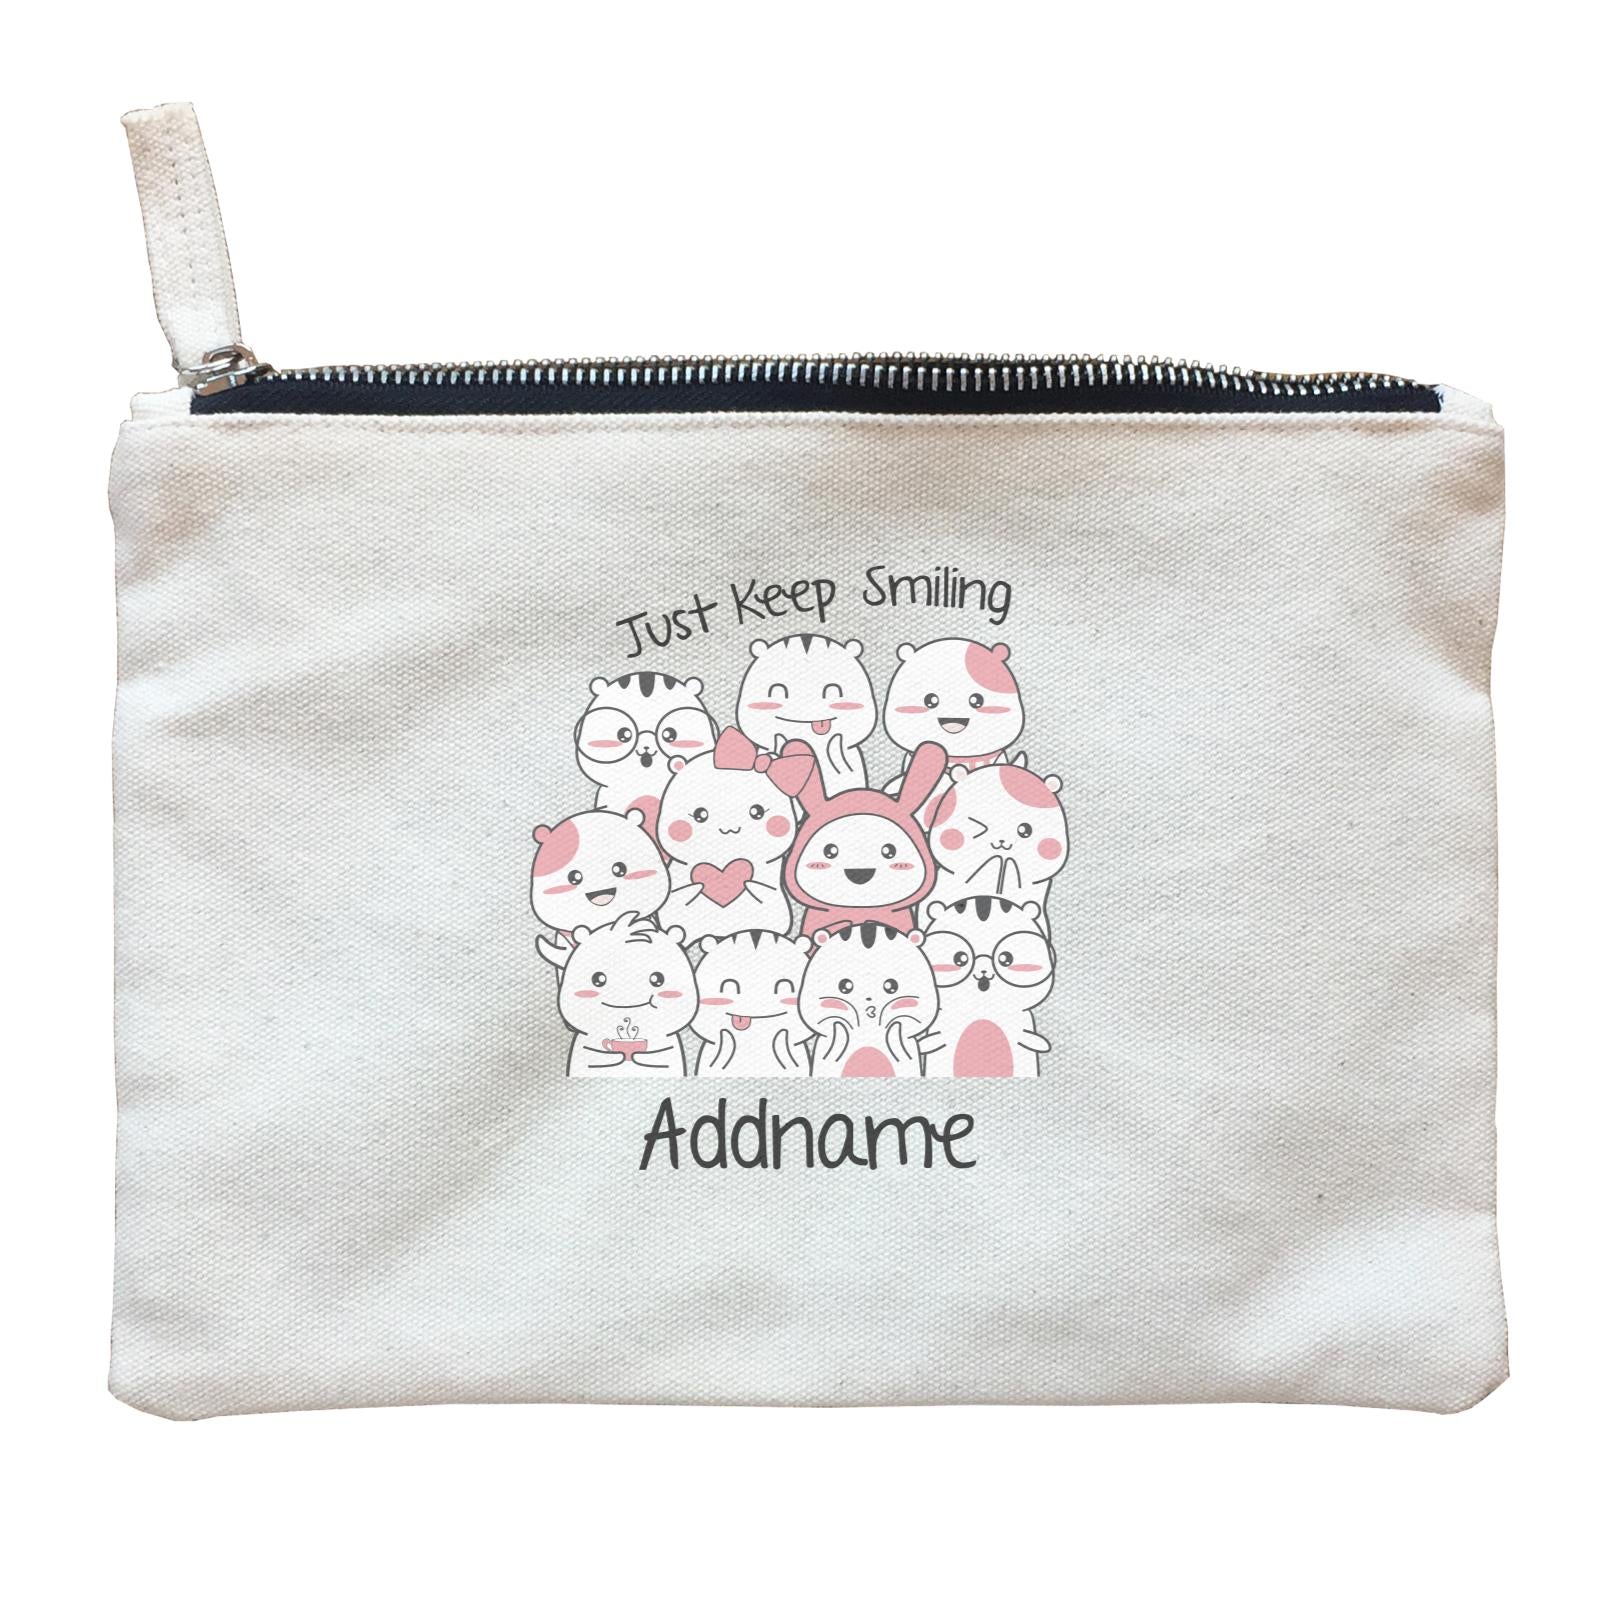 Cute Animals And Friends Series Cute Hamster Just Keep Smiling Addname Zipper Pouch